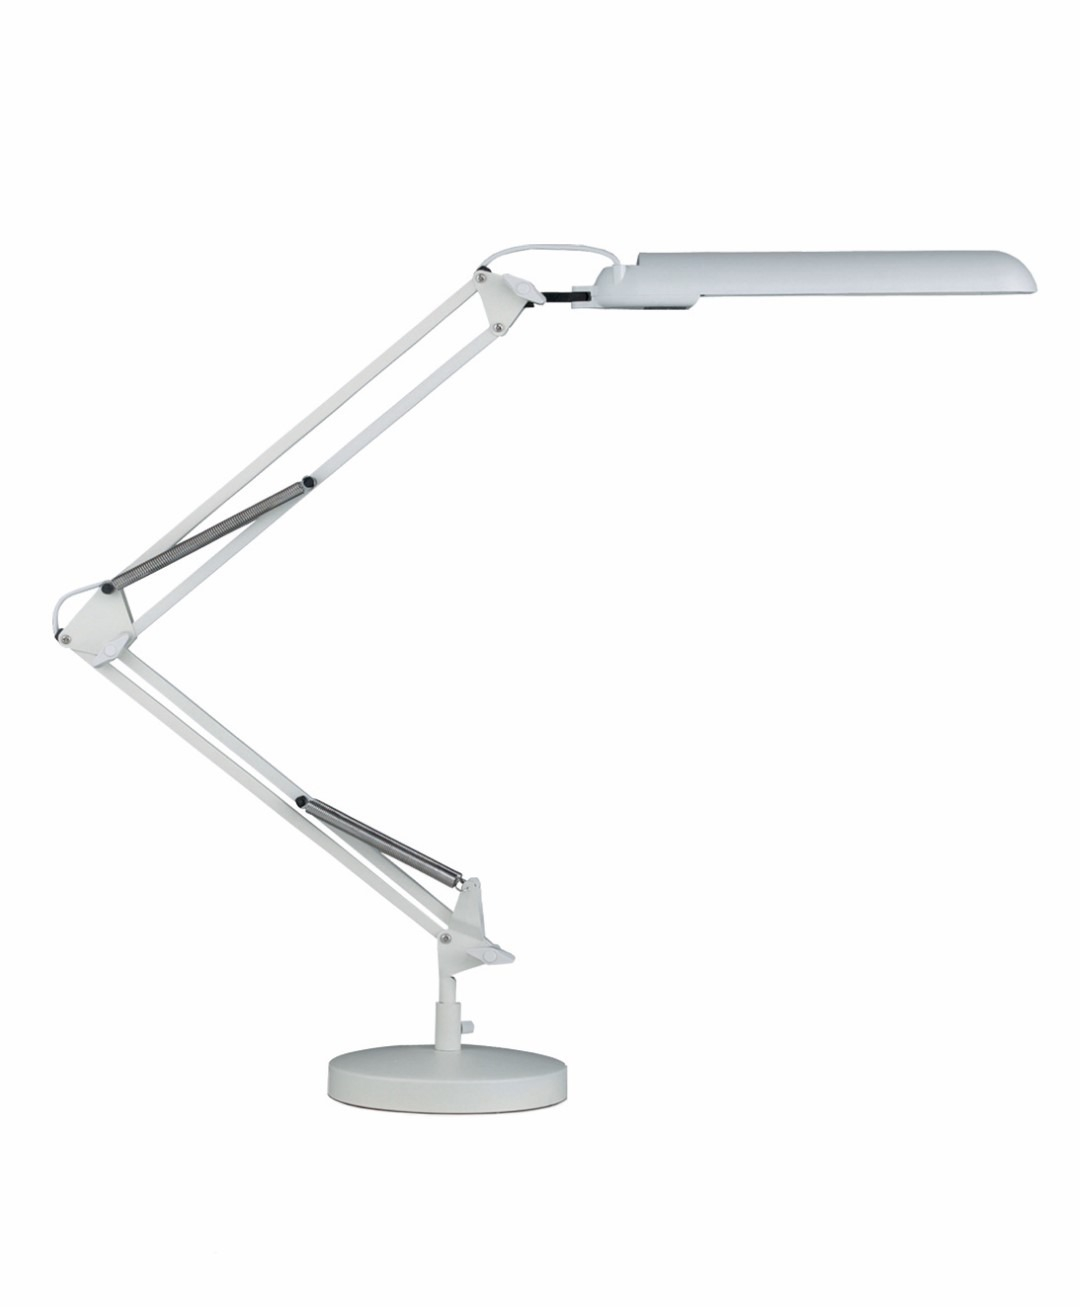 Daylight Pl Desk Lamp White Heamar Company Limited for size 1080 X 1307